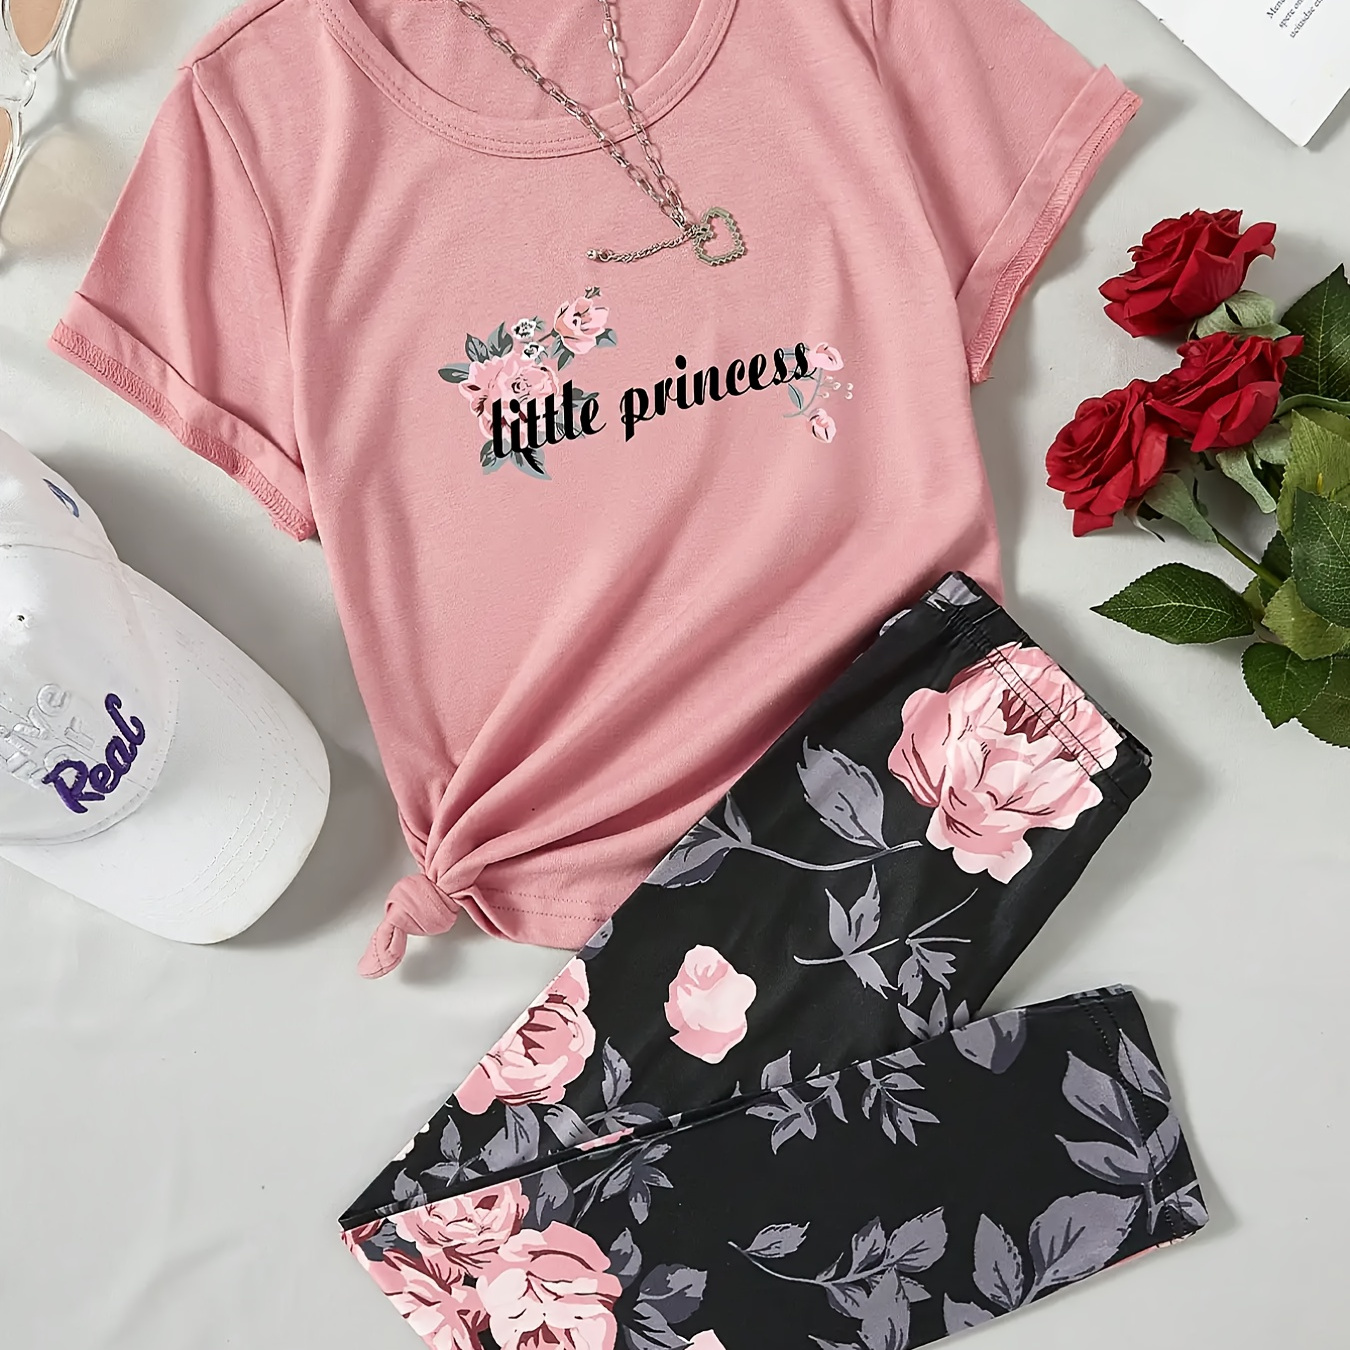 

Graffiti Letters & Roses Graphic Print, Girls Stylish & Comfy Outfit, 2pcs/set Short Sleeve Tee & Trousers